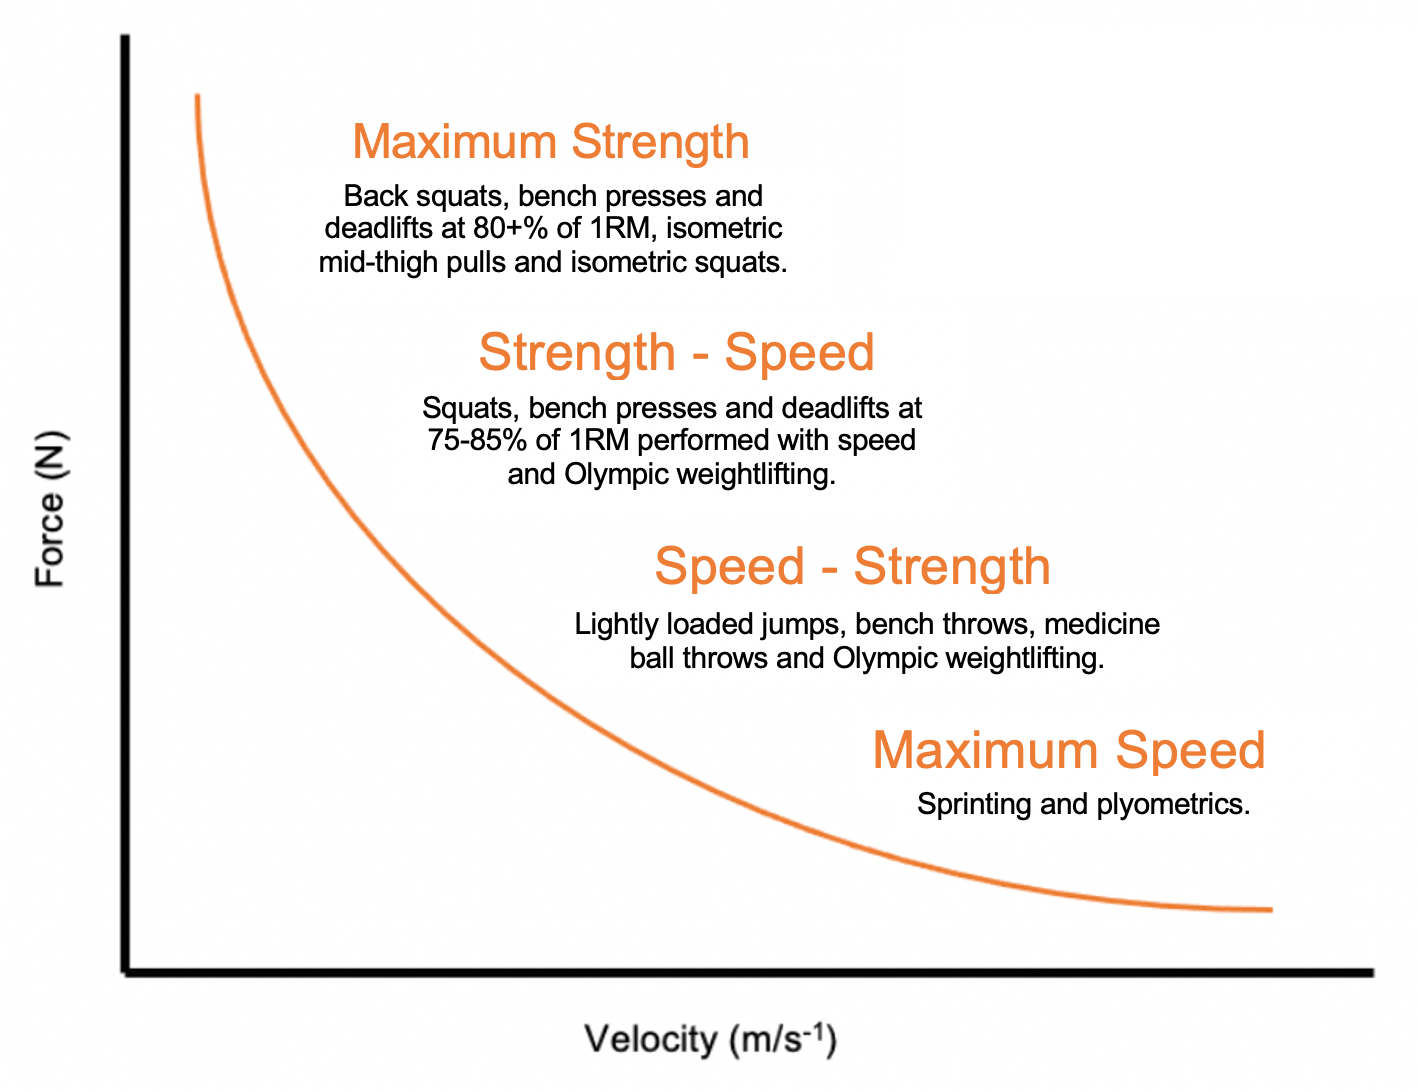 An Overview of the Force Velocity Curve and Its Significance in Performance and Potential